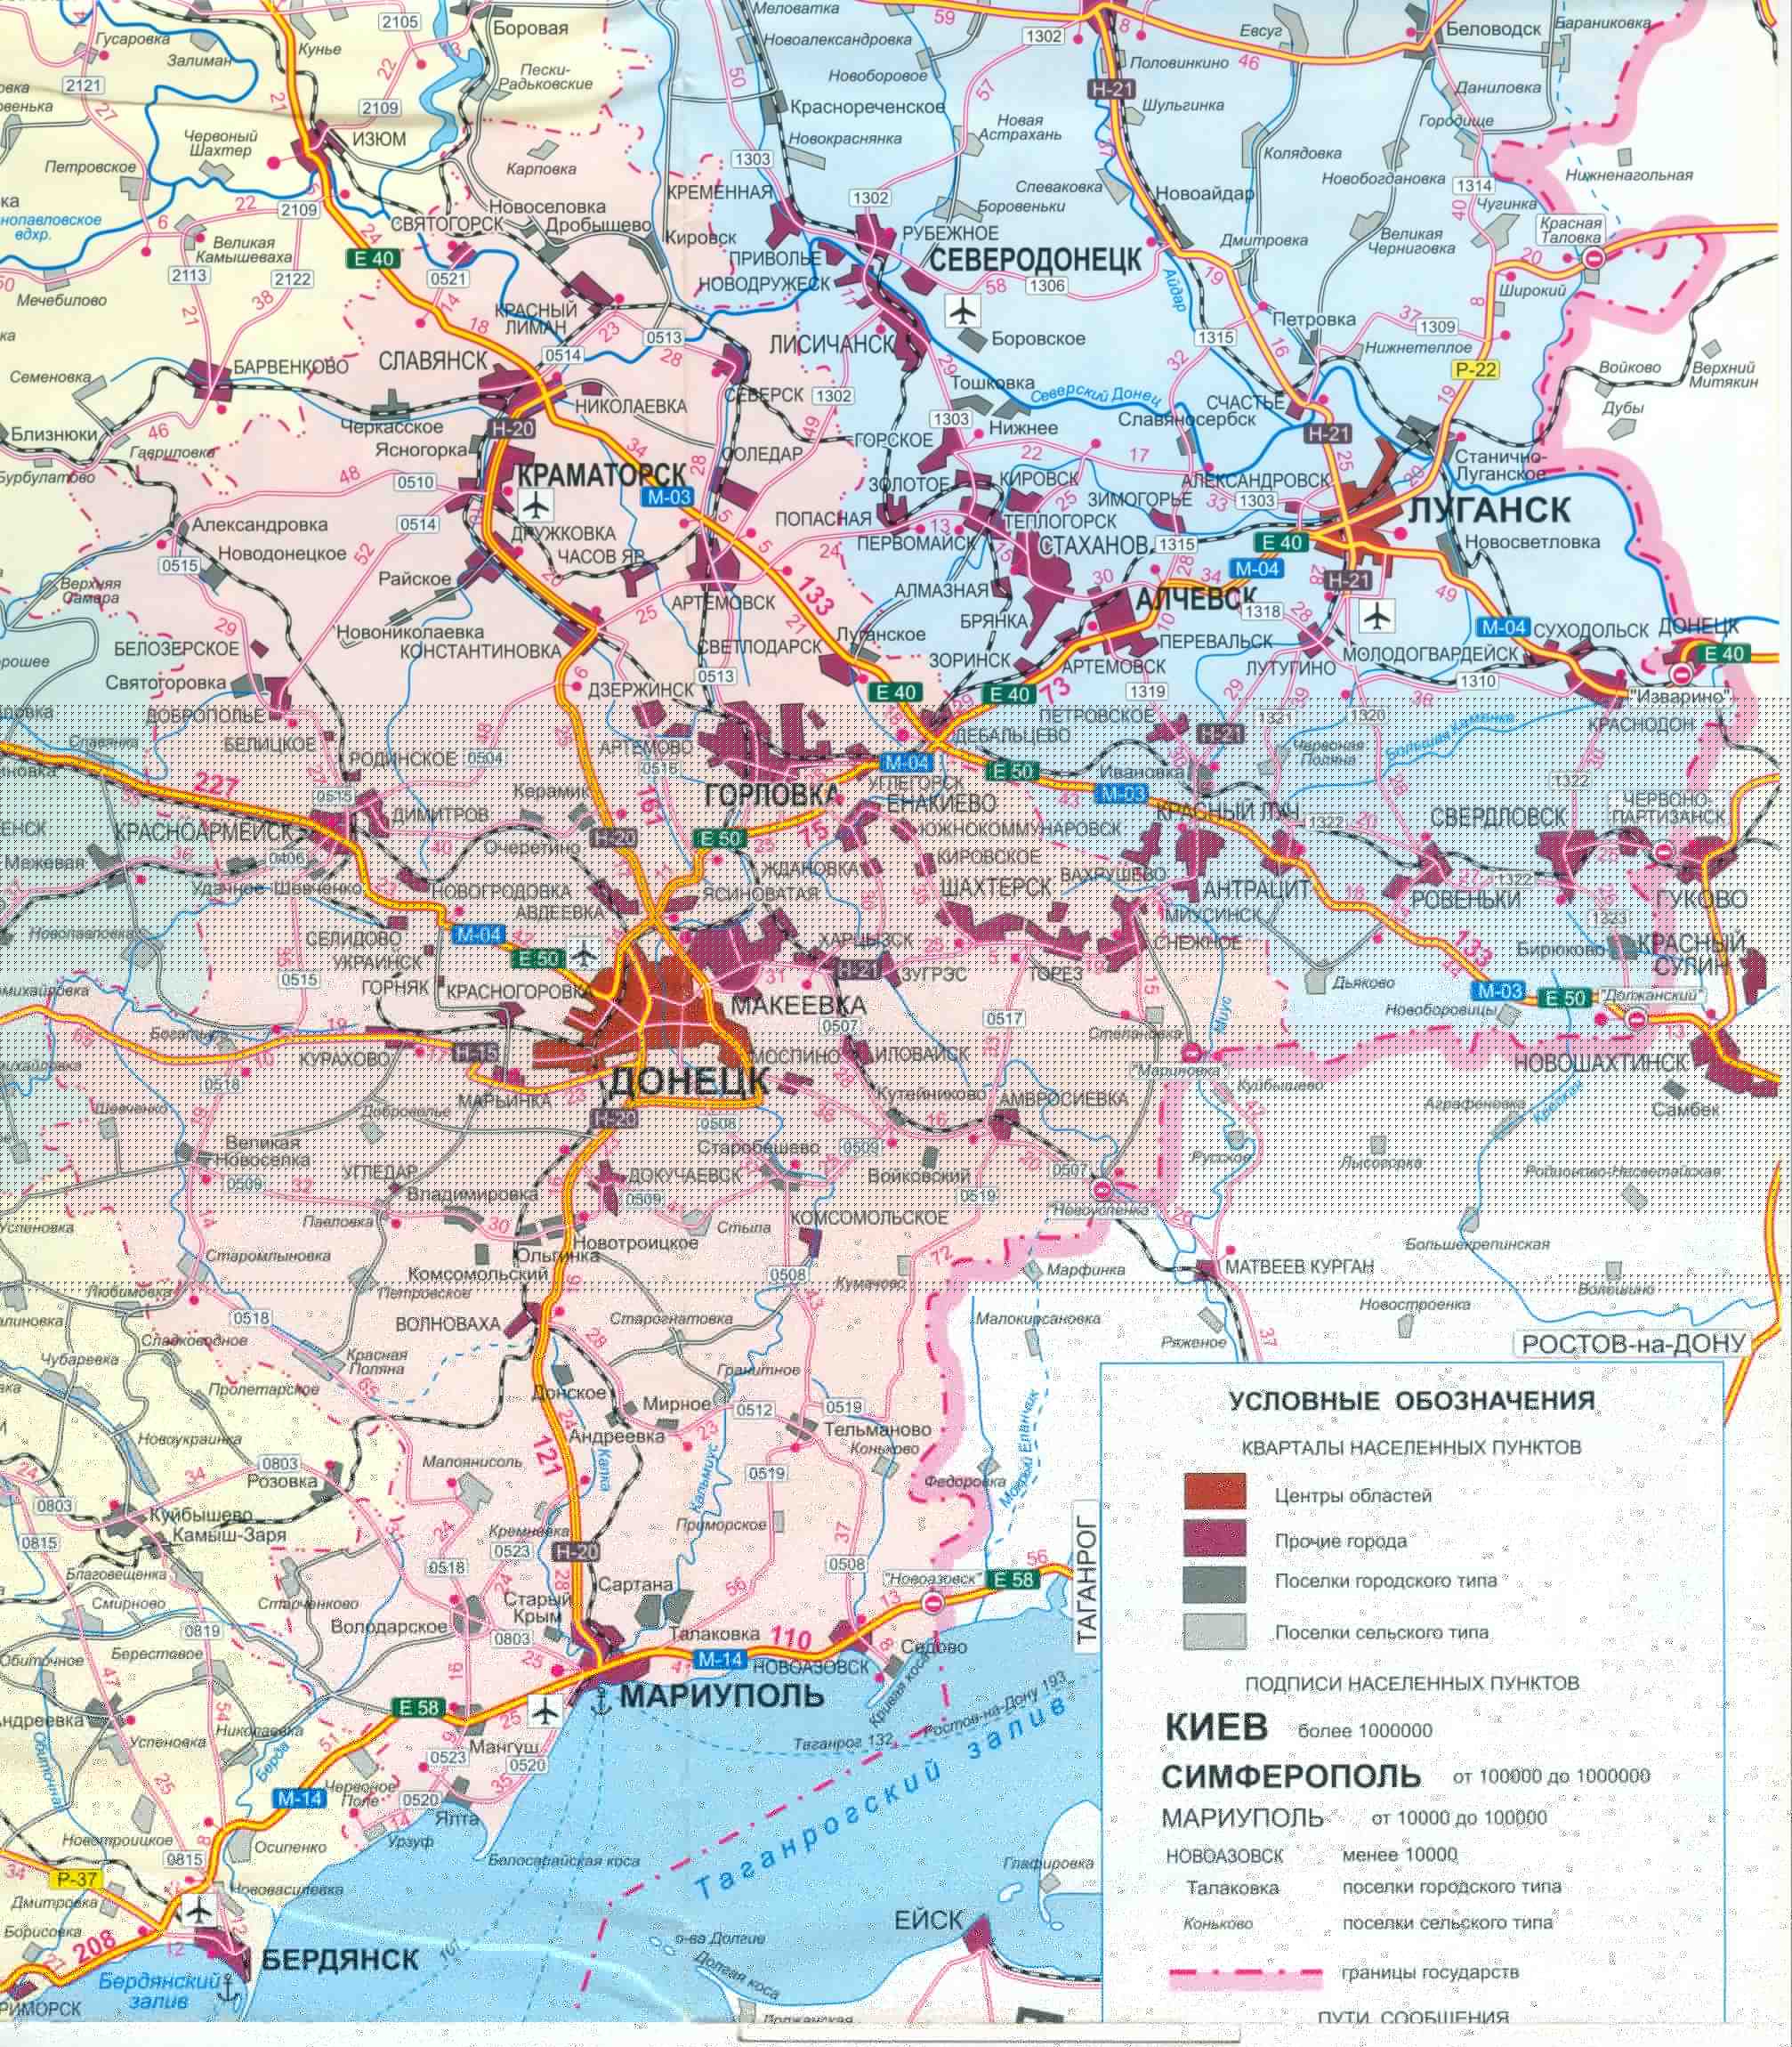 The map of Ukraine is free of charge. Map of roads of Ukraine free download. Large map of Ukraine's roads for free, E1